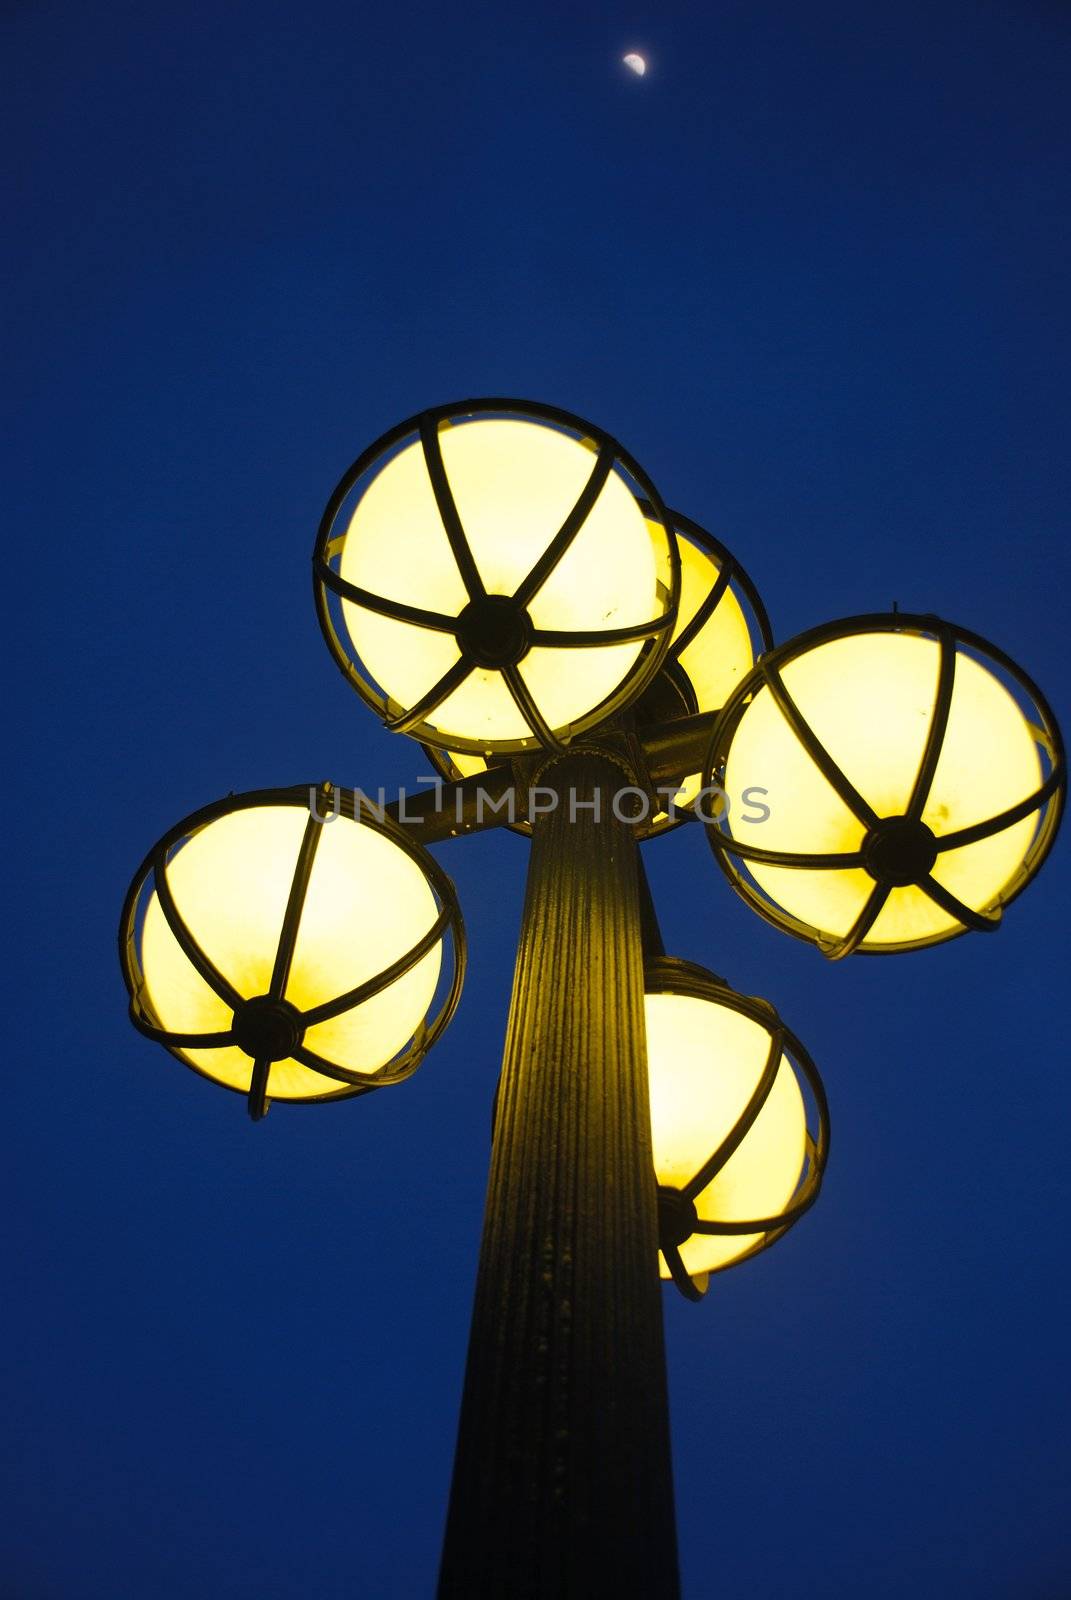 View of  antique street light against blue sky and moon. taken at singapore city in a beautiful evening